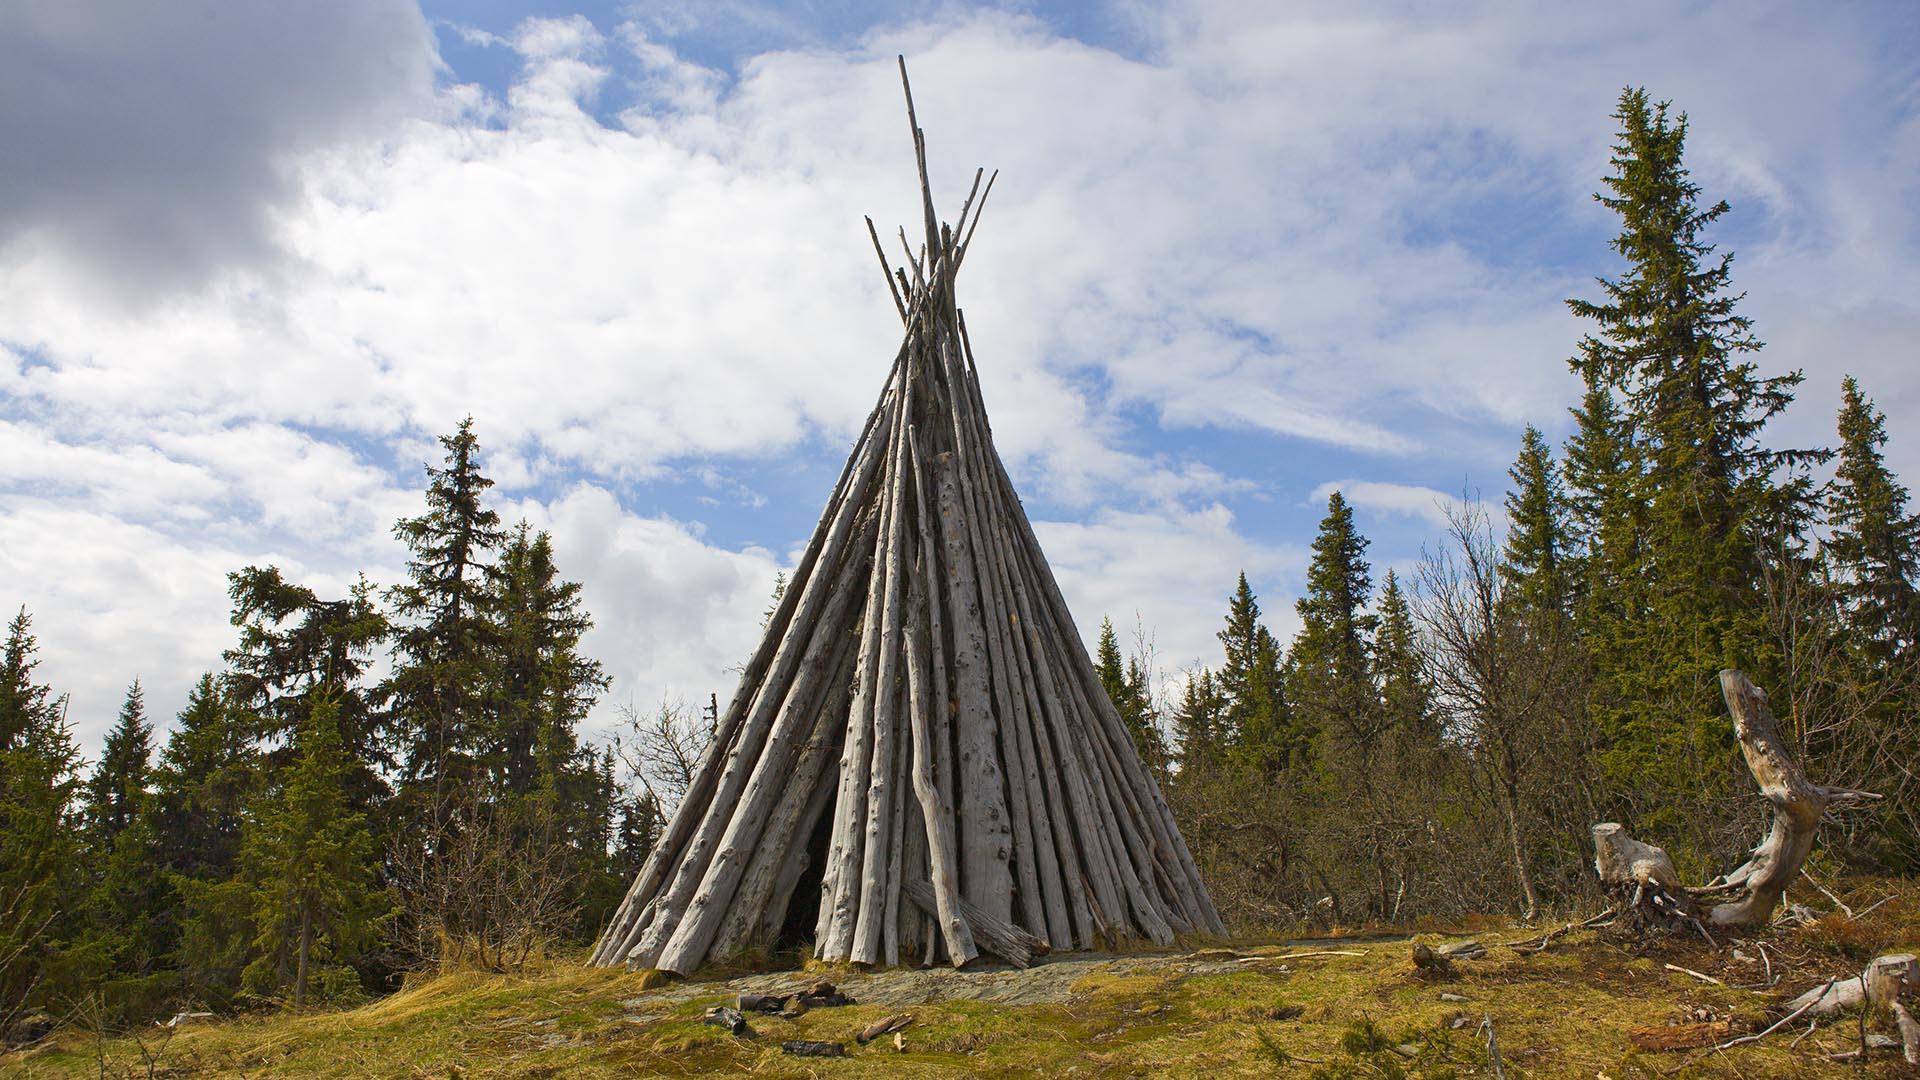 A historical war beacon made from tree trunks piled up against each other like a teepee.